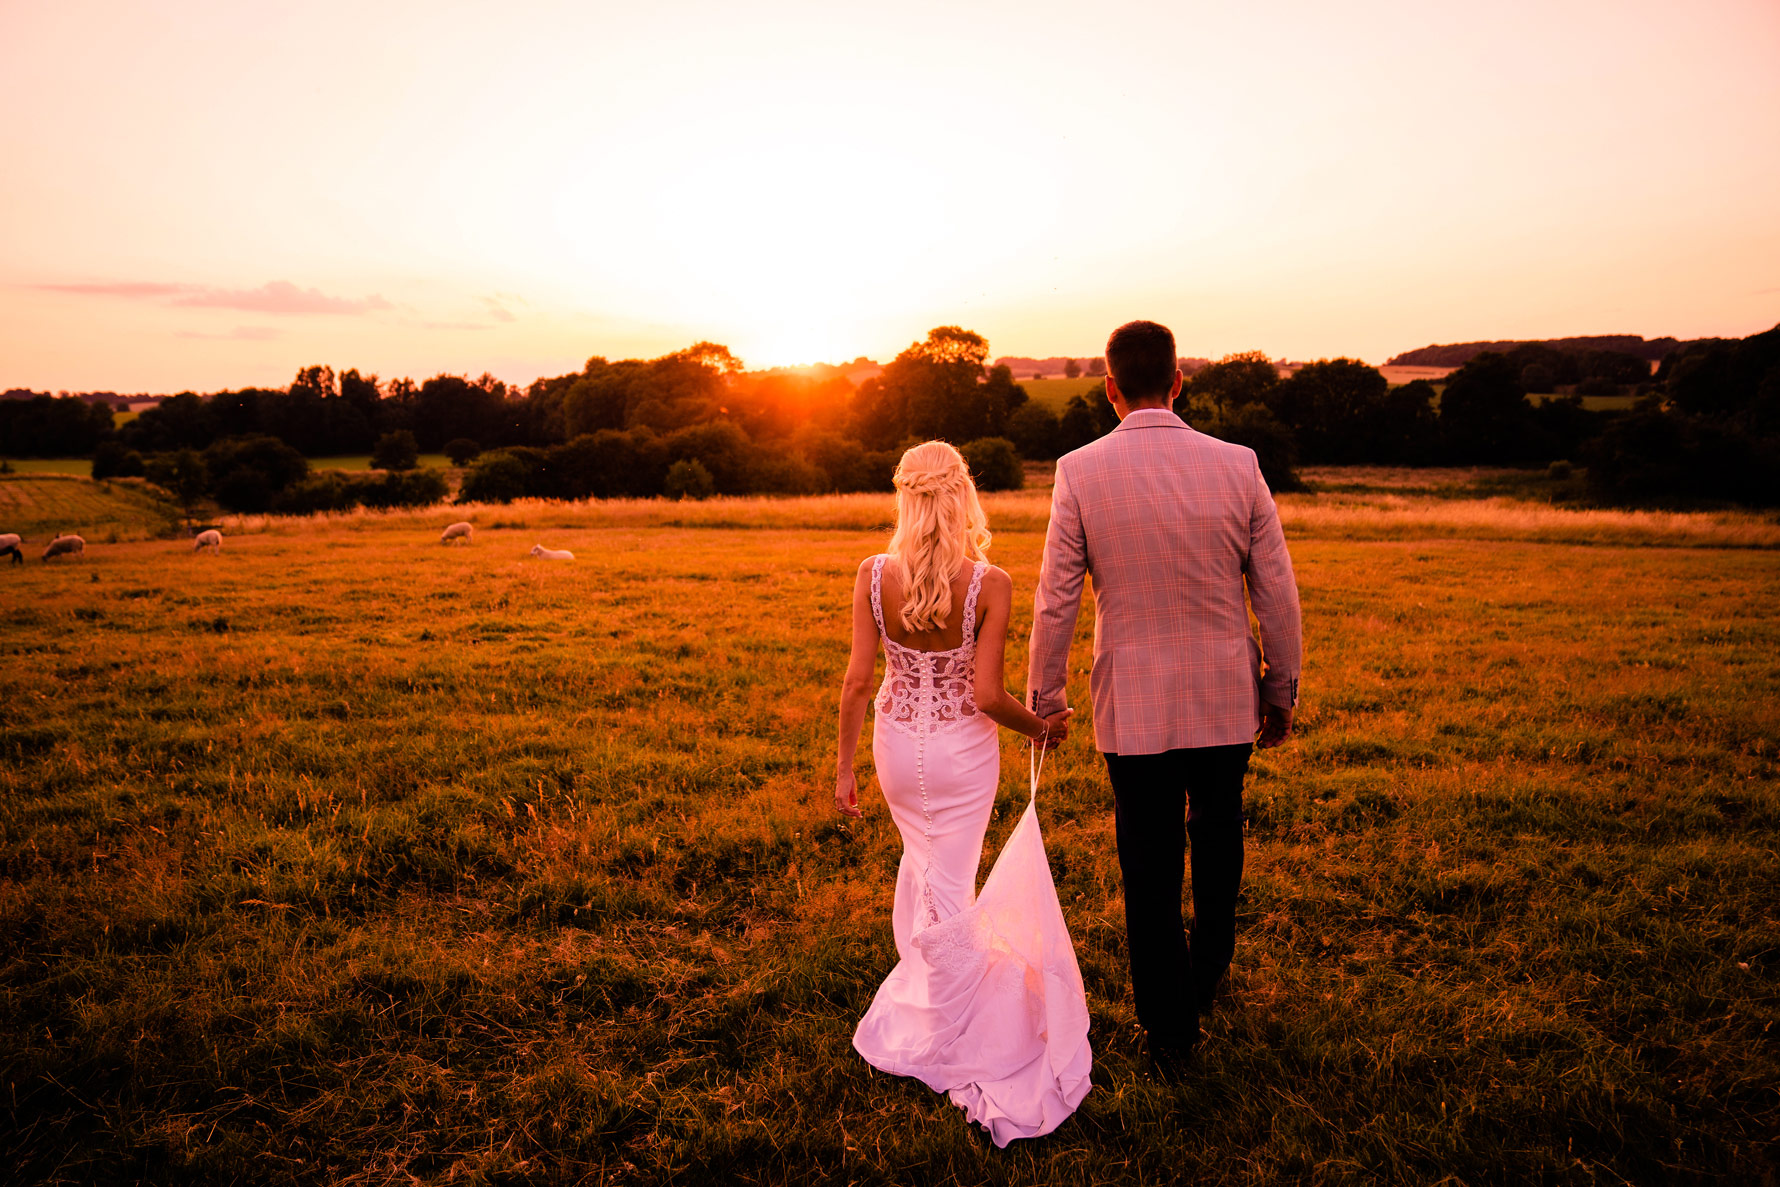 sunset wedding photography at Dodford manor